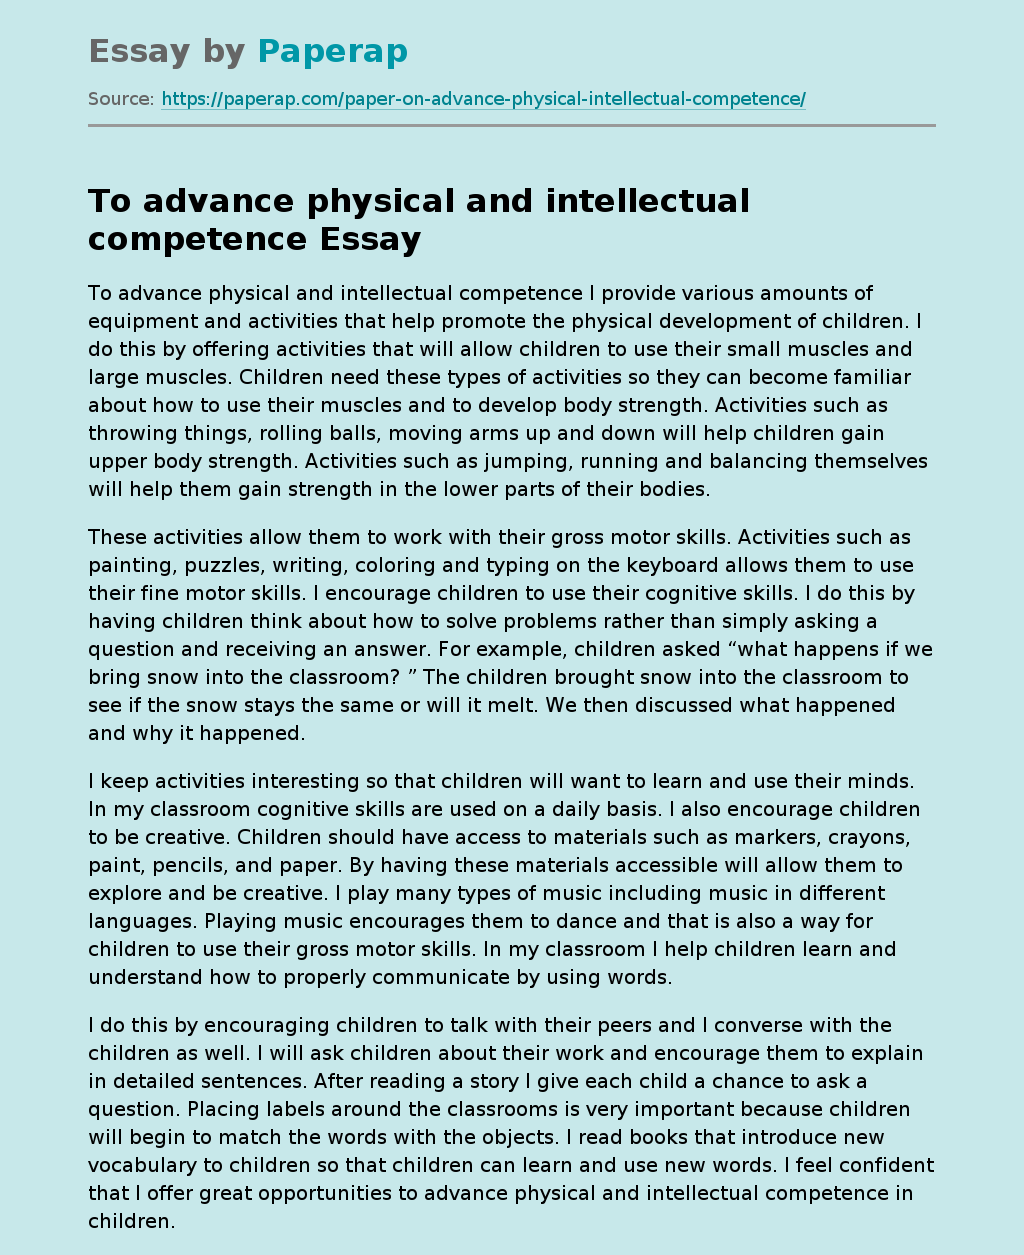 To advance physical and intellectual competence